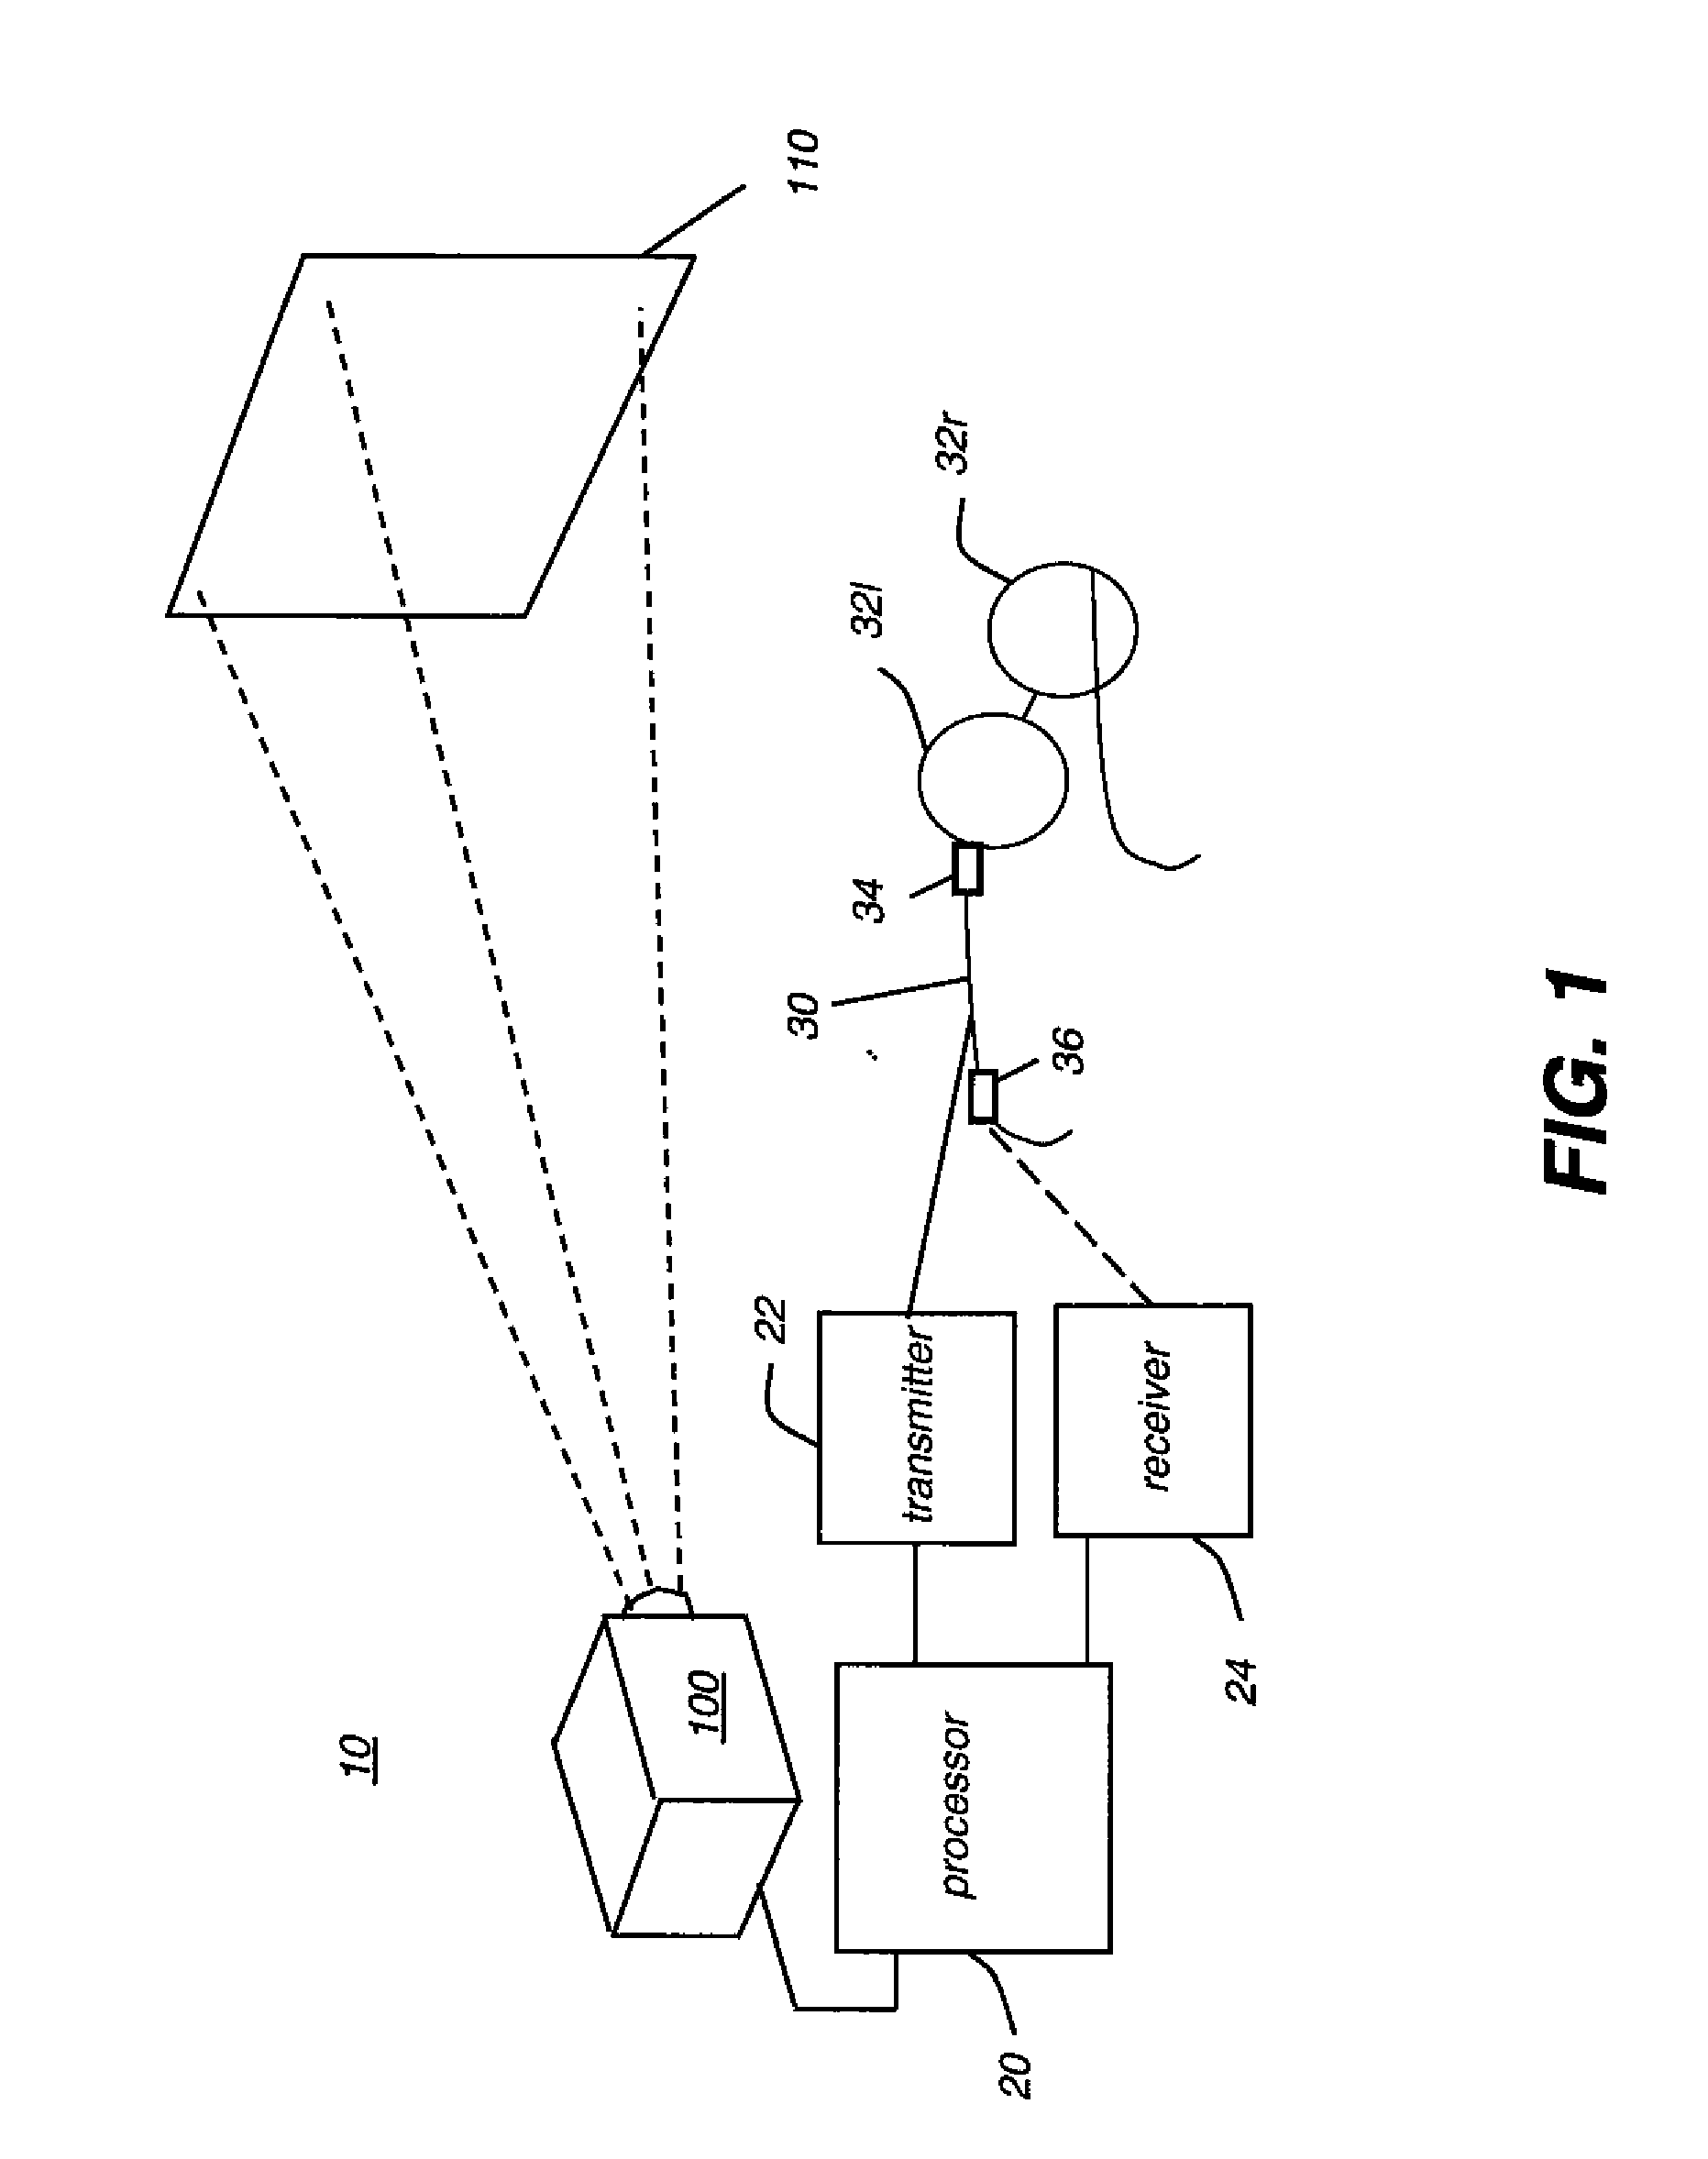 Switchable 2-d/3-d display system